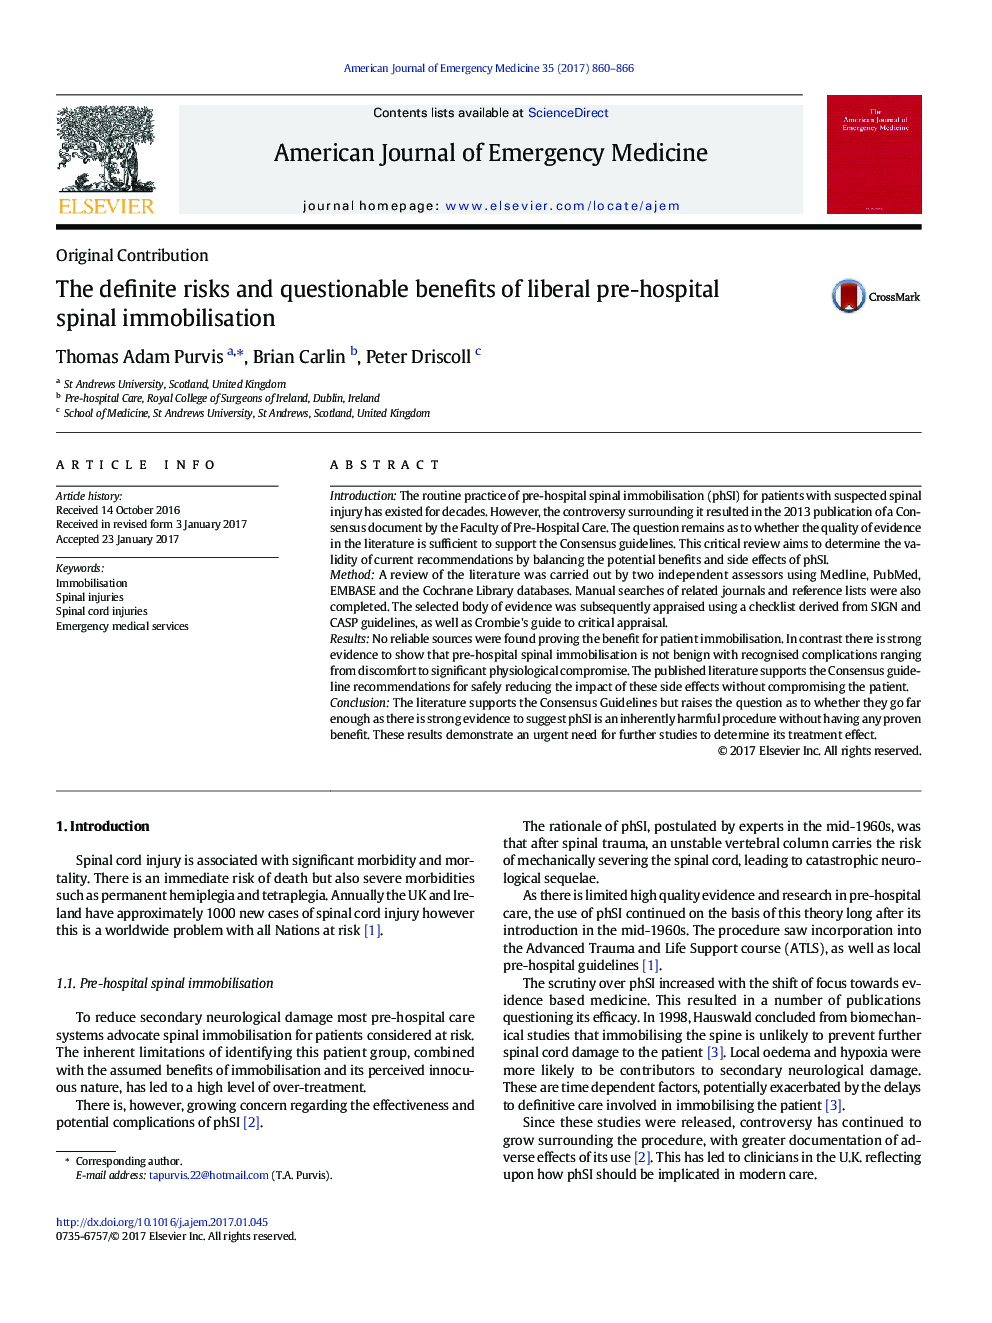 The definite risks and questionable benefits of liberal pre-hospital spinal immobilisation